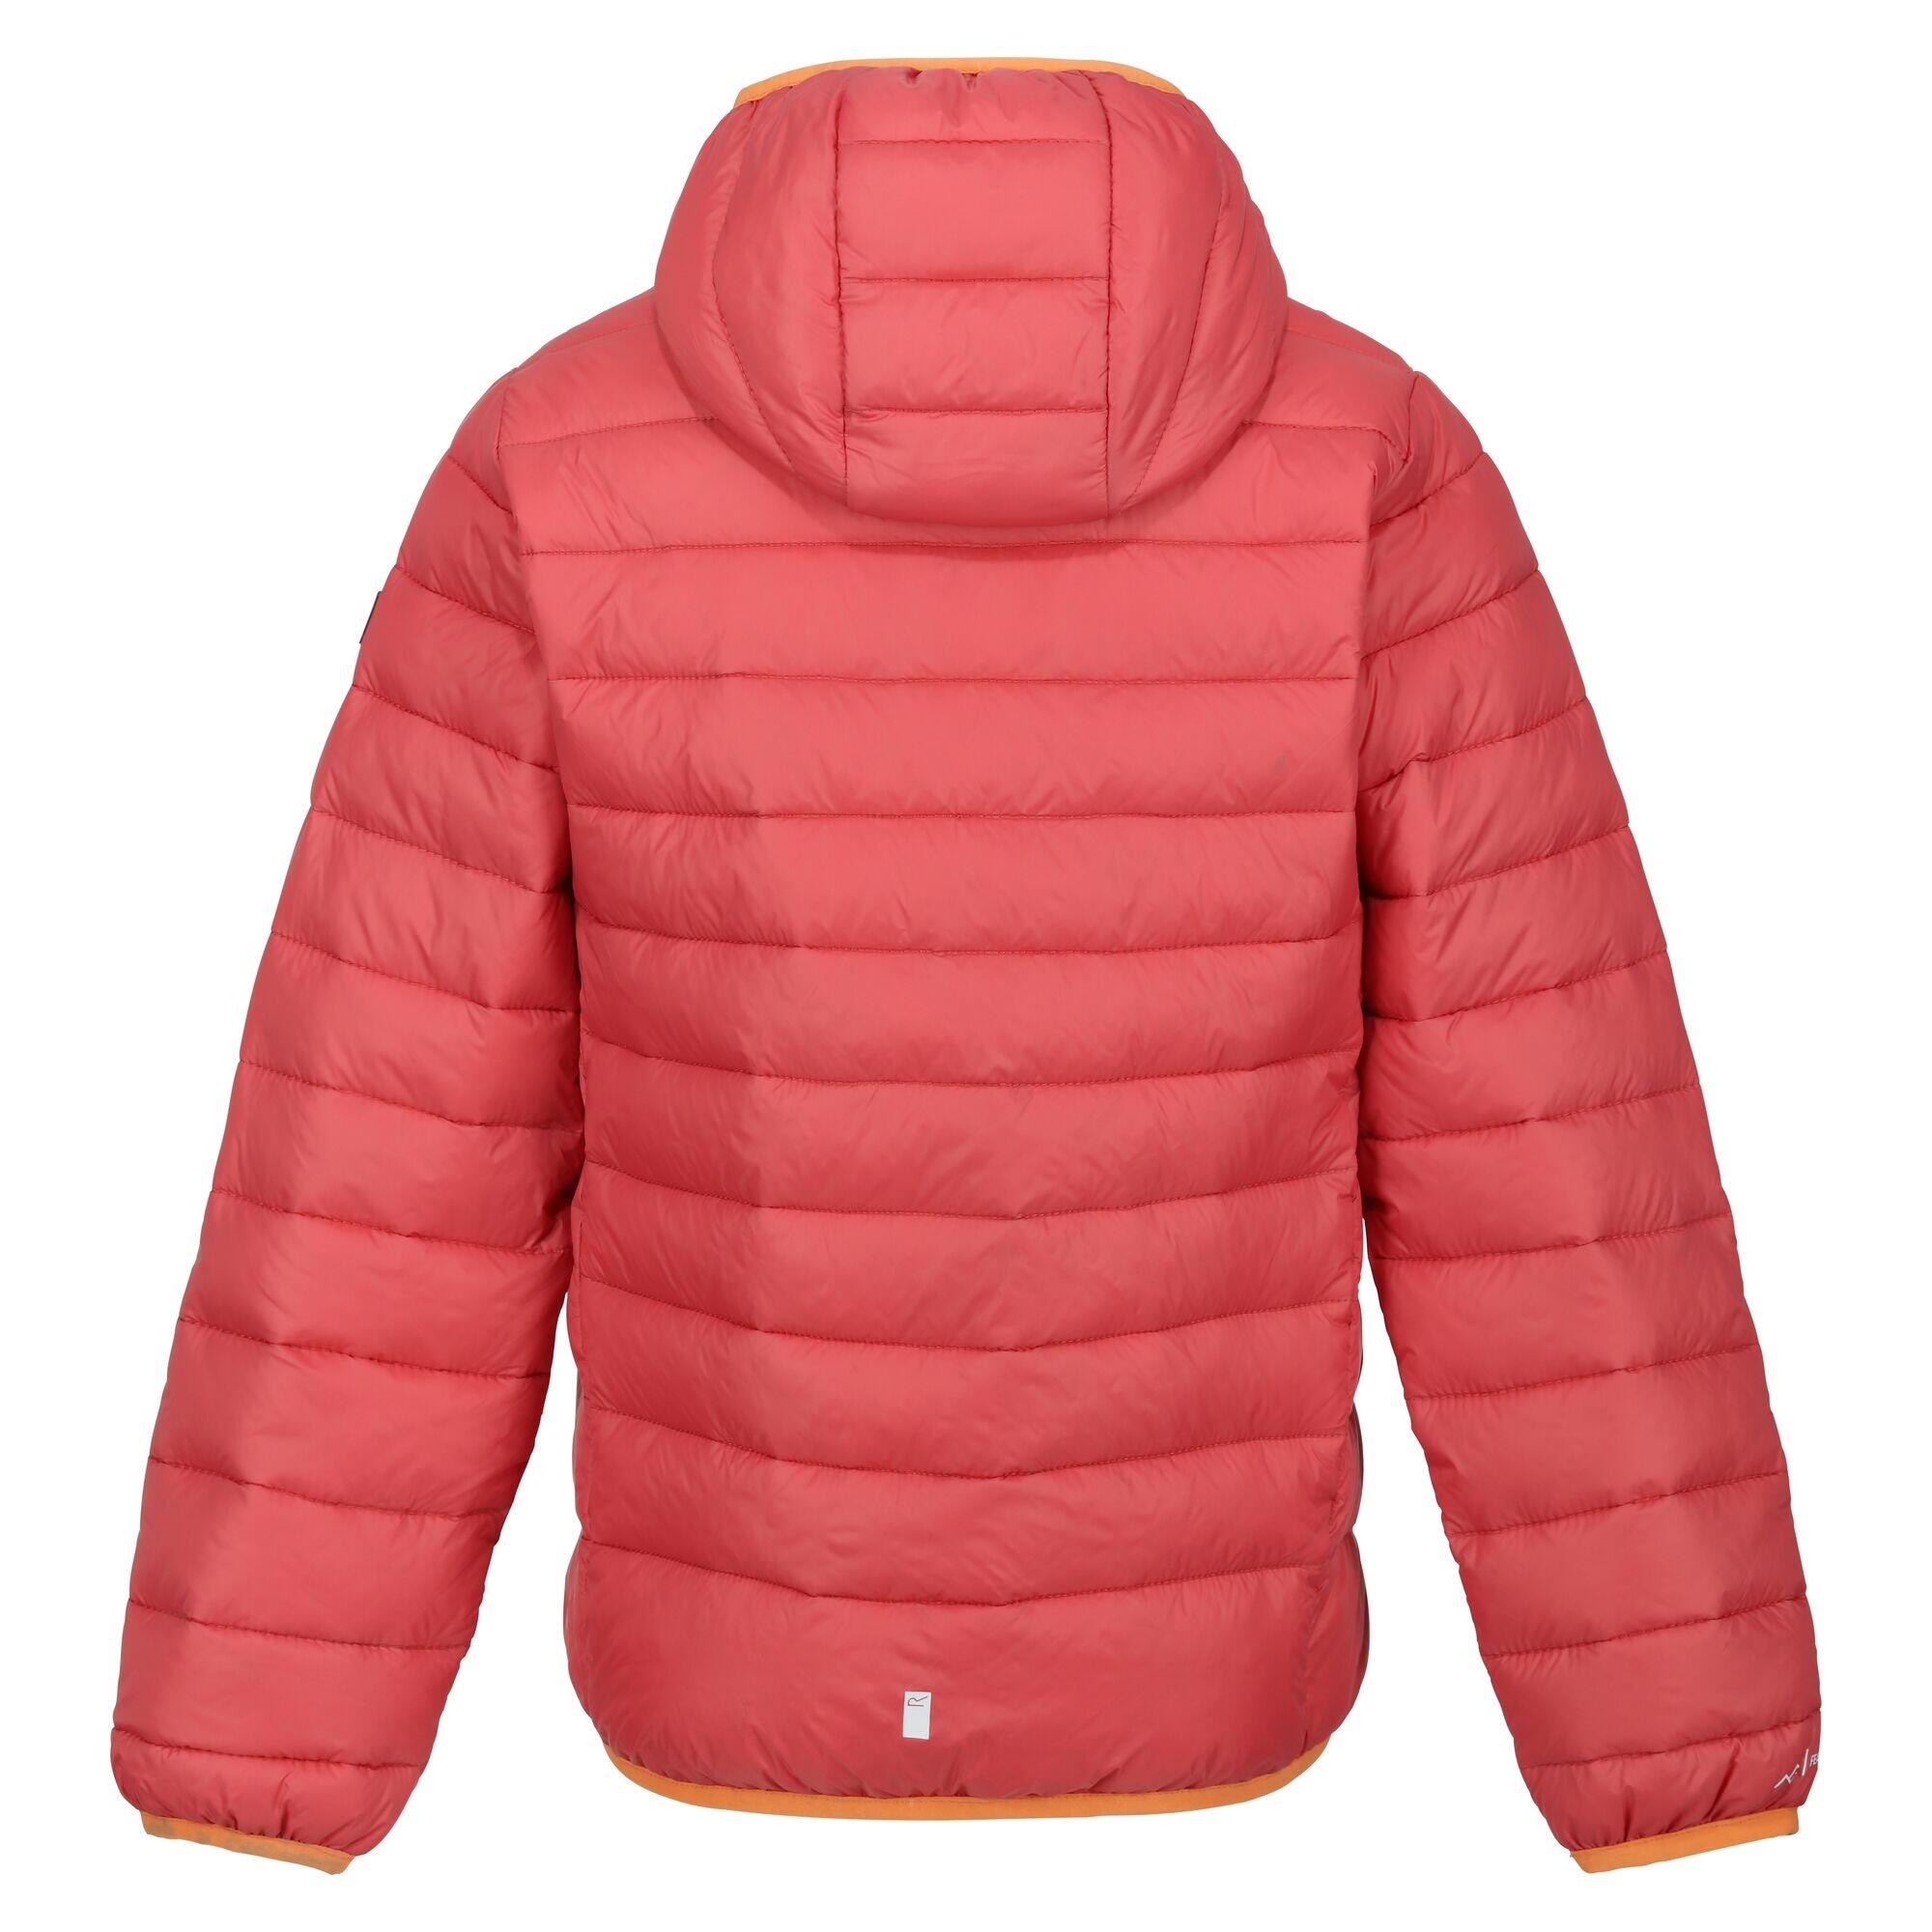 Childrens/Kids Marizion Hooded Padded Jacket (Mineral Red/Burgundy) 2/5